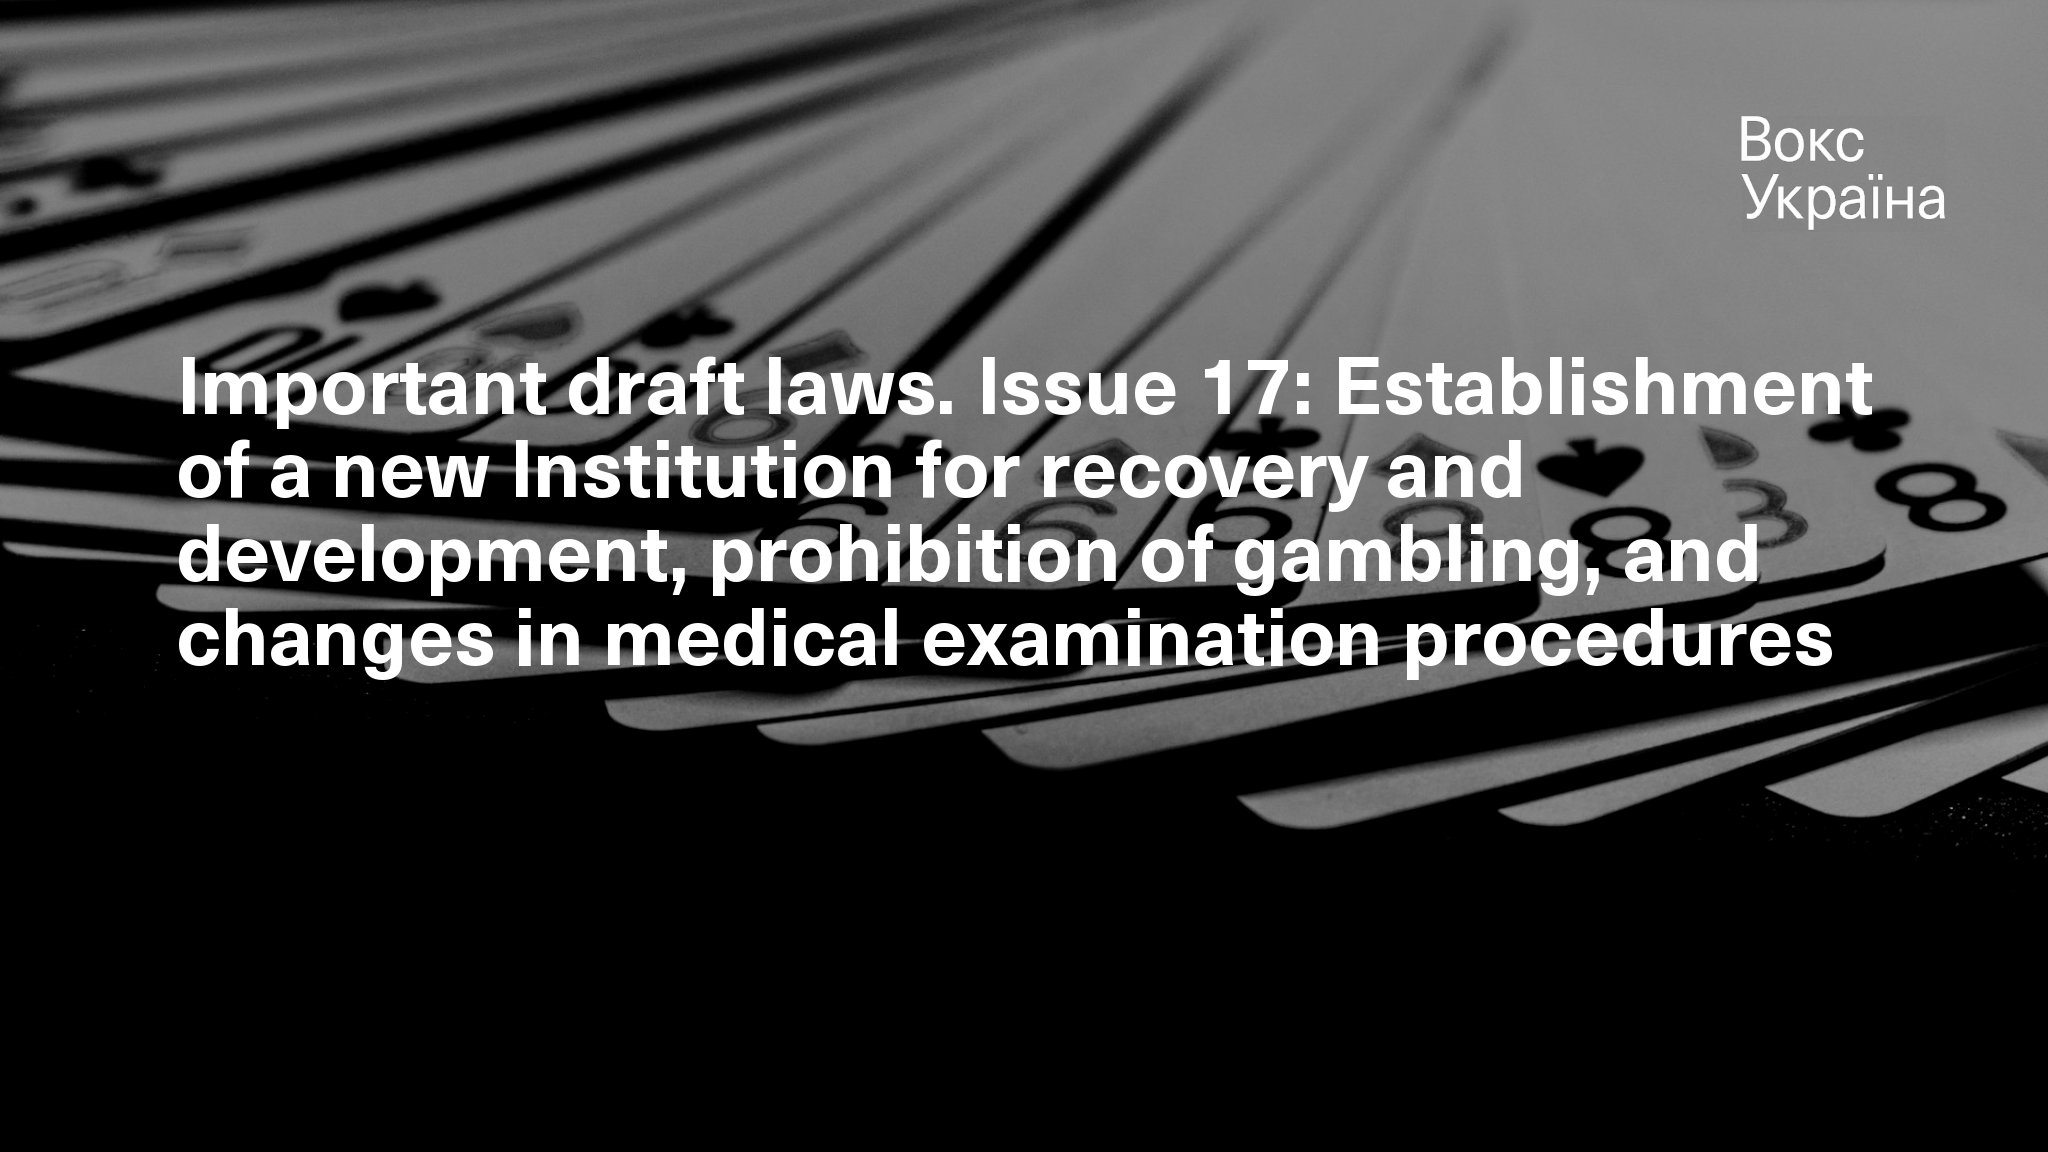 Important draft laws. Issue 17: Establishment of a new Institution for recovery and development, prohibition of gambling, and changes in medical examination procedures